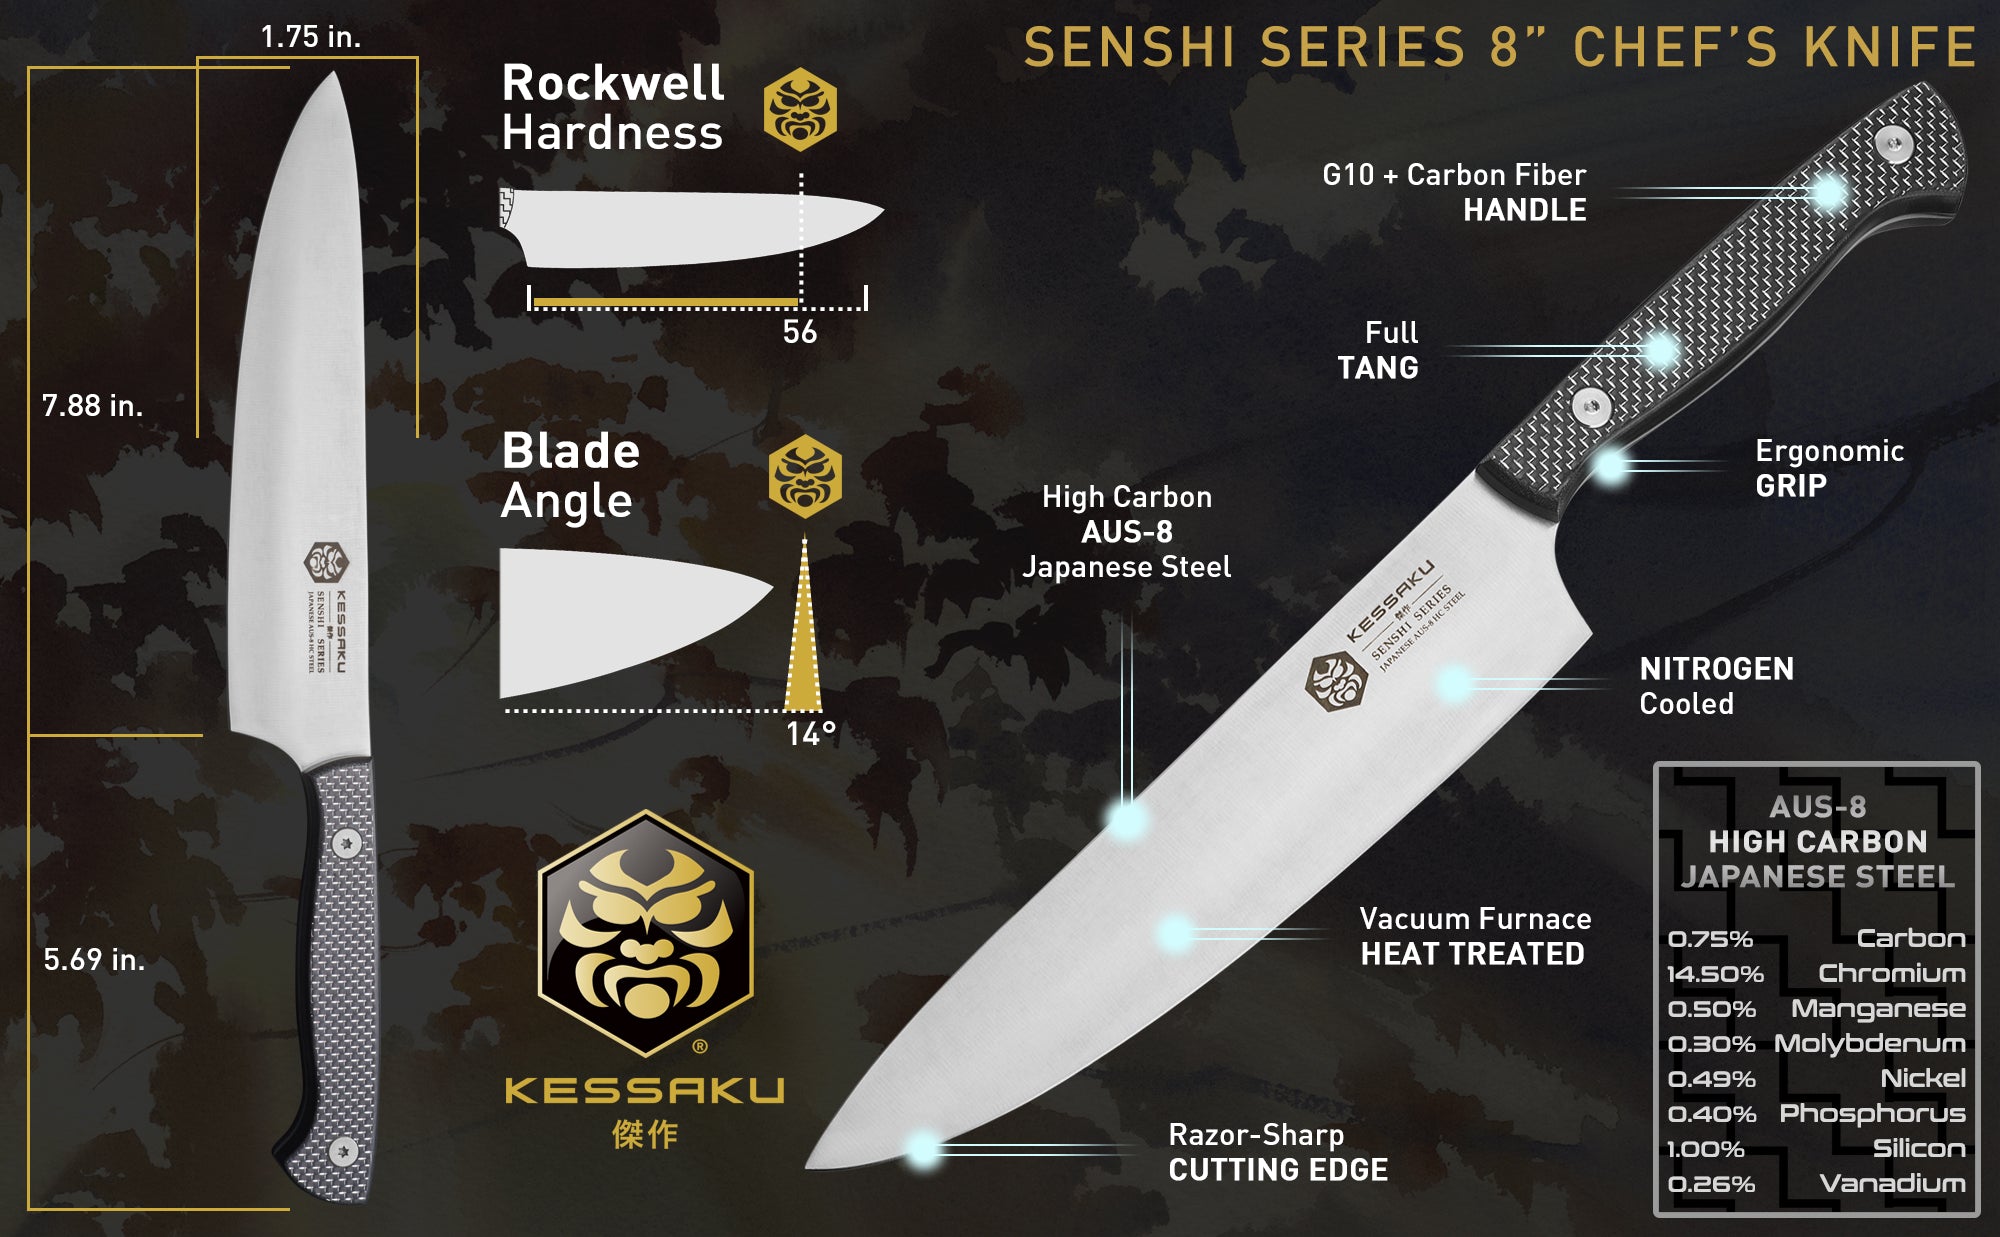 The Kessaku Senshi Series 8-Inch Chef's Knife's features, dimensions, and steel composition